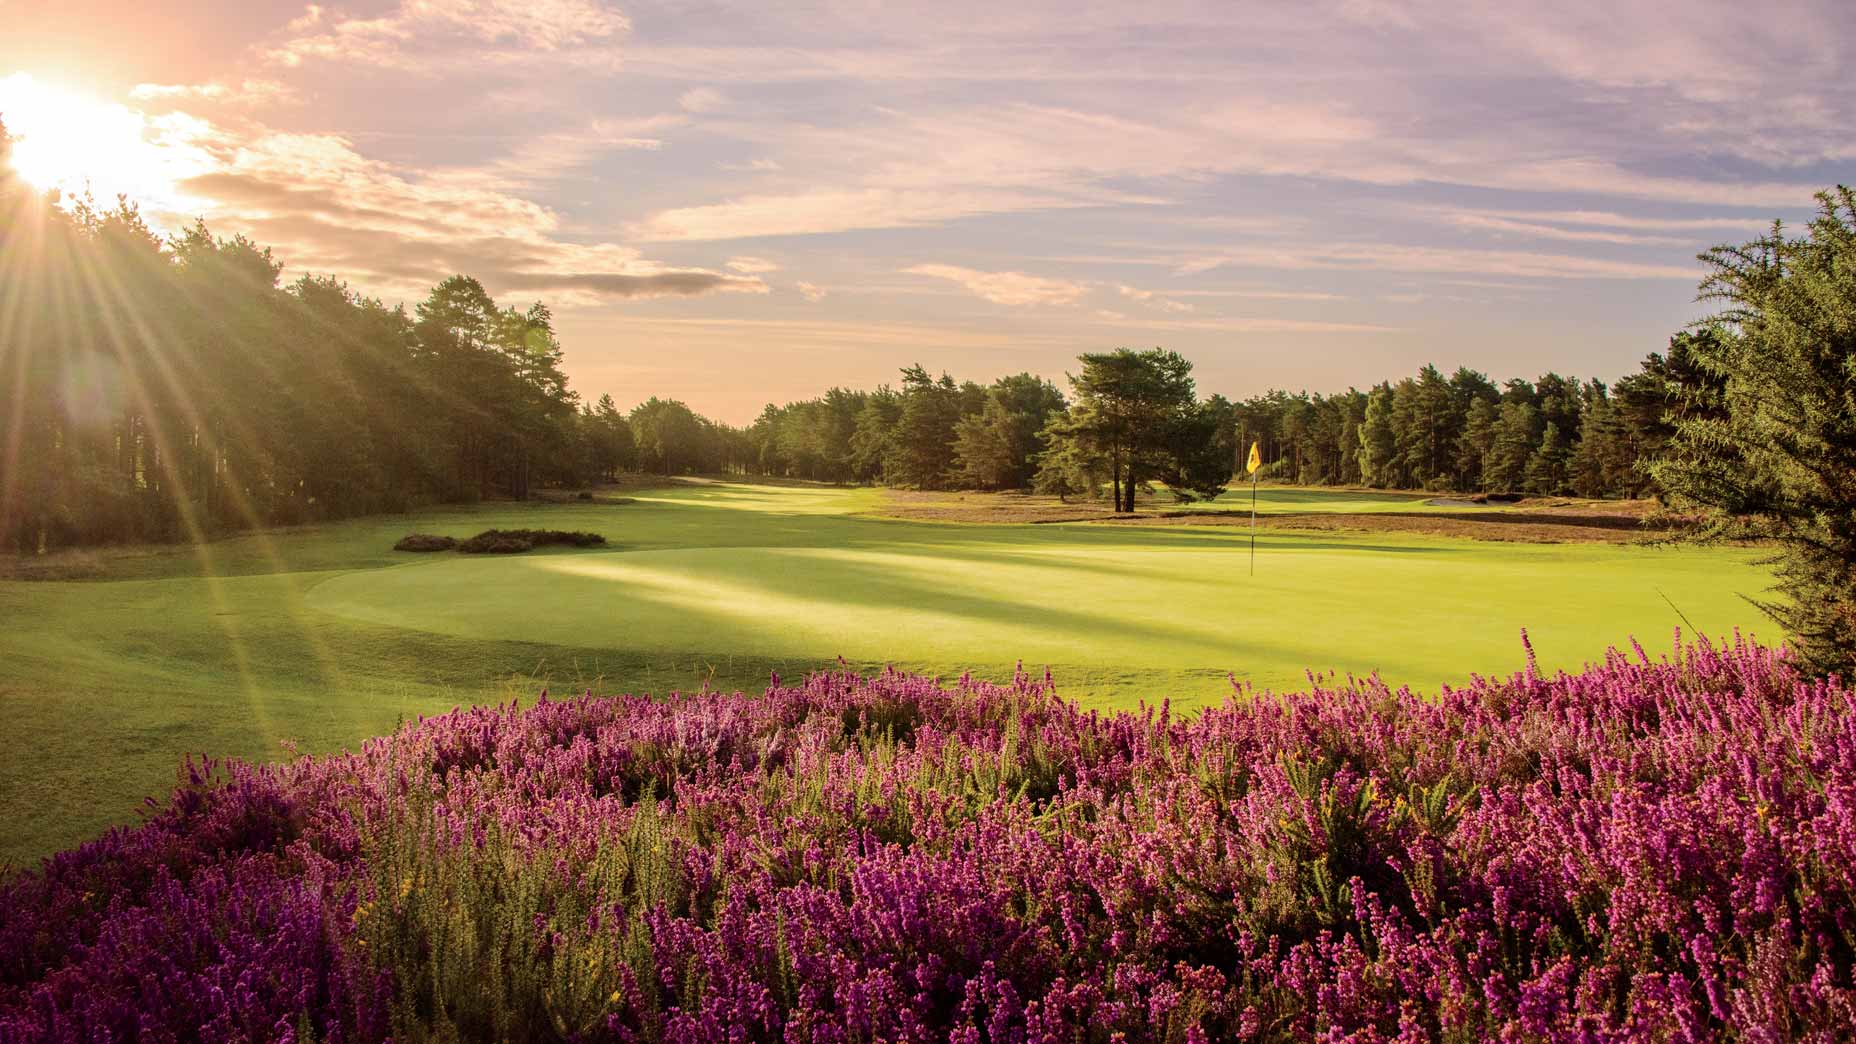 Sunningdale New golf course in Sunningdale, England